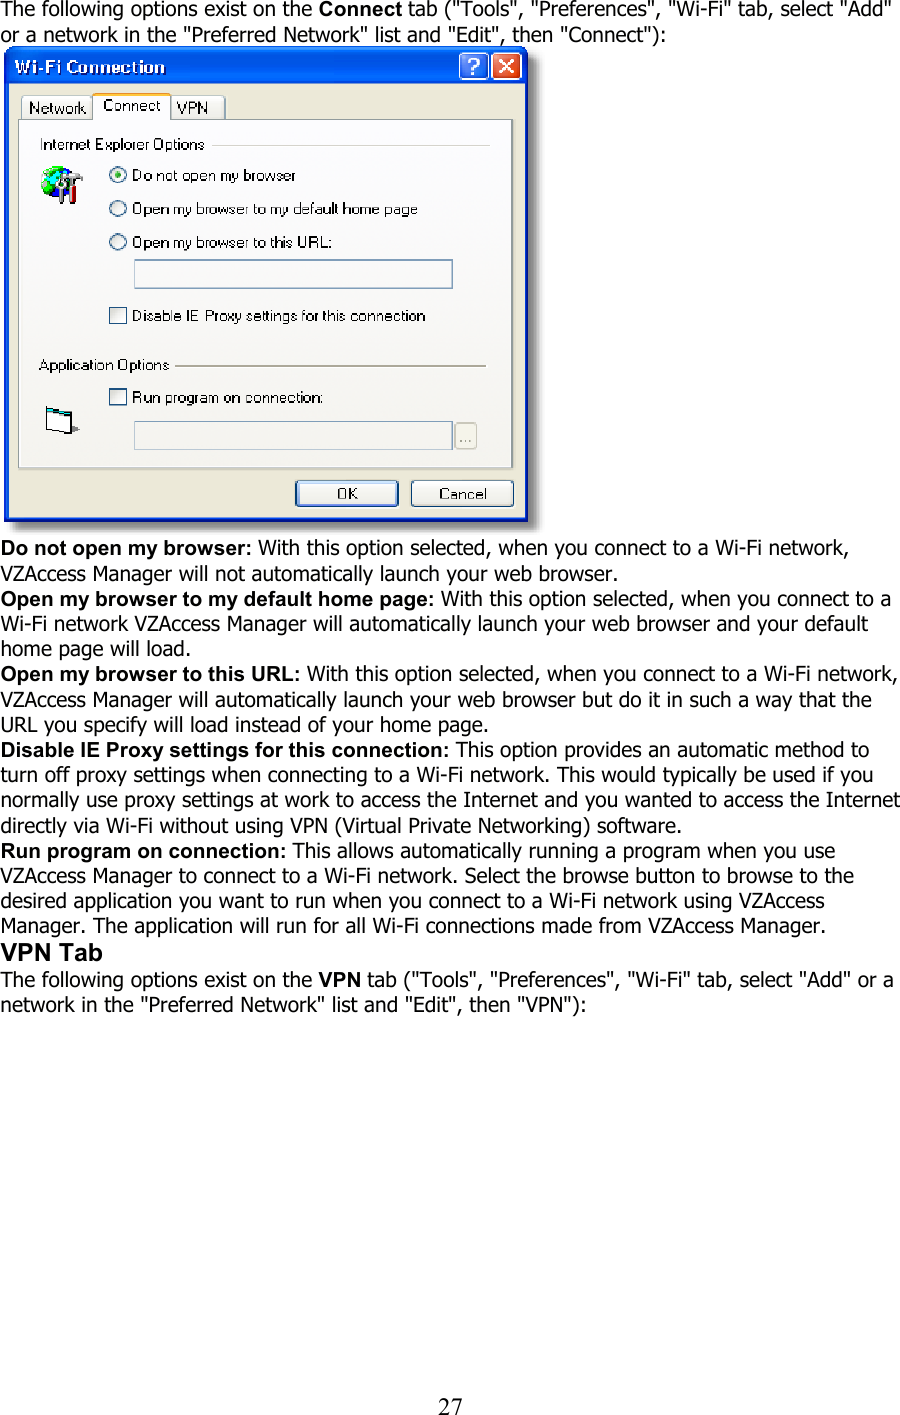  27The following options exist on the Connect tab (&quot;Tools&quot;, &quot;Preferences&quot;, &quot;Wi-Fi&quot; tab, select &quot;Add&quot; or a network in the &quot;Preferred Network&quot; list and &quot;Edit&quot;, then &quot;Connect&quot;):    Do not open my browser: With this option selected, when you connect to a Wi-Fi network, VZAccess Manager will not automatically launch your web browser. Open my browser to my default home page: With this option selected, when you connect to a Wi-Fi network VZAccess Manager will automatically launch your web browser and your default home page will load. Open my browser to this URL: With this option selected, when you connect to a Wi-Fi network, VZAccess Manager will automatically launch your web browser but do it in such a way that the URL you specify will load instead of your home page. Disable IE Proxy settings for this connection: This option provides an automatic method to turn off proxy settings when connecting to a Wi-Fi network. This would typically be used if you normally use proxy settings at work to access the Internet and you wanted to access the Internet directly via Wi-Fi without using VPN (Virtual Private Networking) software. Run program on connection: This allows automatically running a program when you use VZAccess Manager to connect to a Wi-Fi network. Select the browse button to browse to the desired application you want to run when you connect to a Wi-Fi network using VZAccess Manager. The application will run for all Wi-Fi connections made from VZAccess Manager. VPN Tab The following options exist on the VPN tab (&quot;Tools&quot;, &quot;Preferences&quot;, &quot;Wi-Fi&quot; tab, select &quot;Add&quot; or a network in the &quot;Preferred Network&quot; list and &quot;Edit&quot;, then &quot;VPN&quot;):  